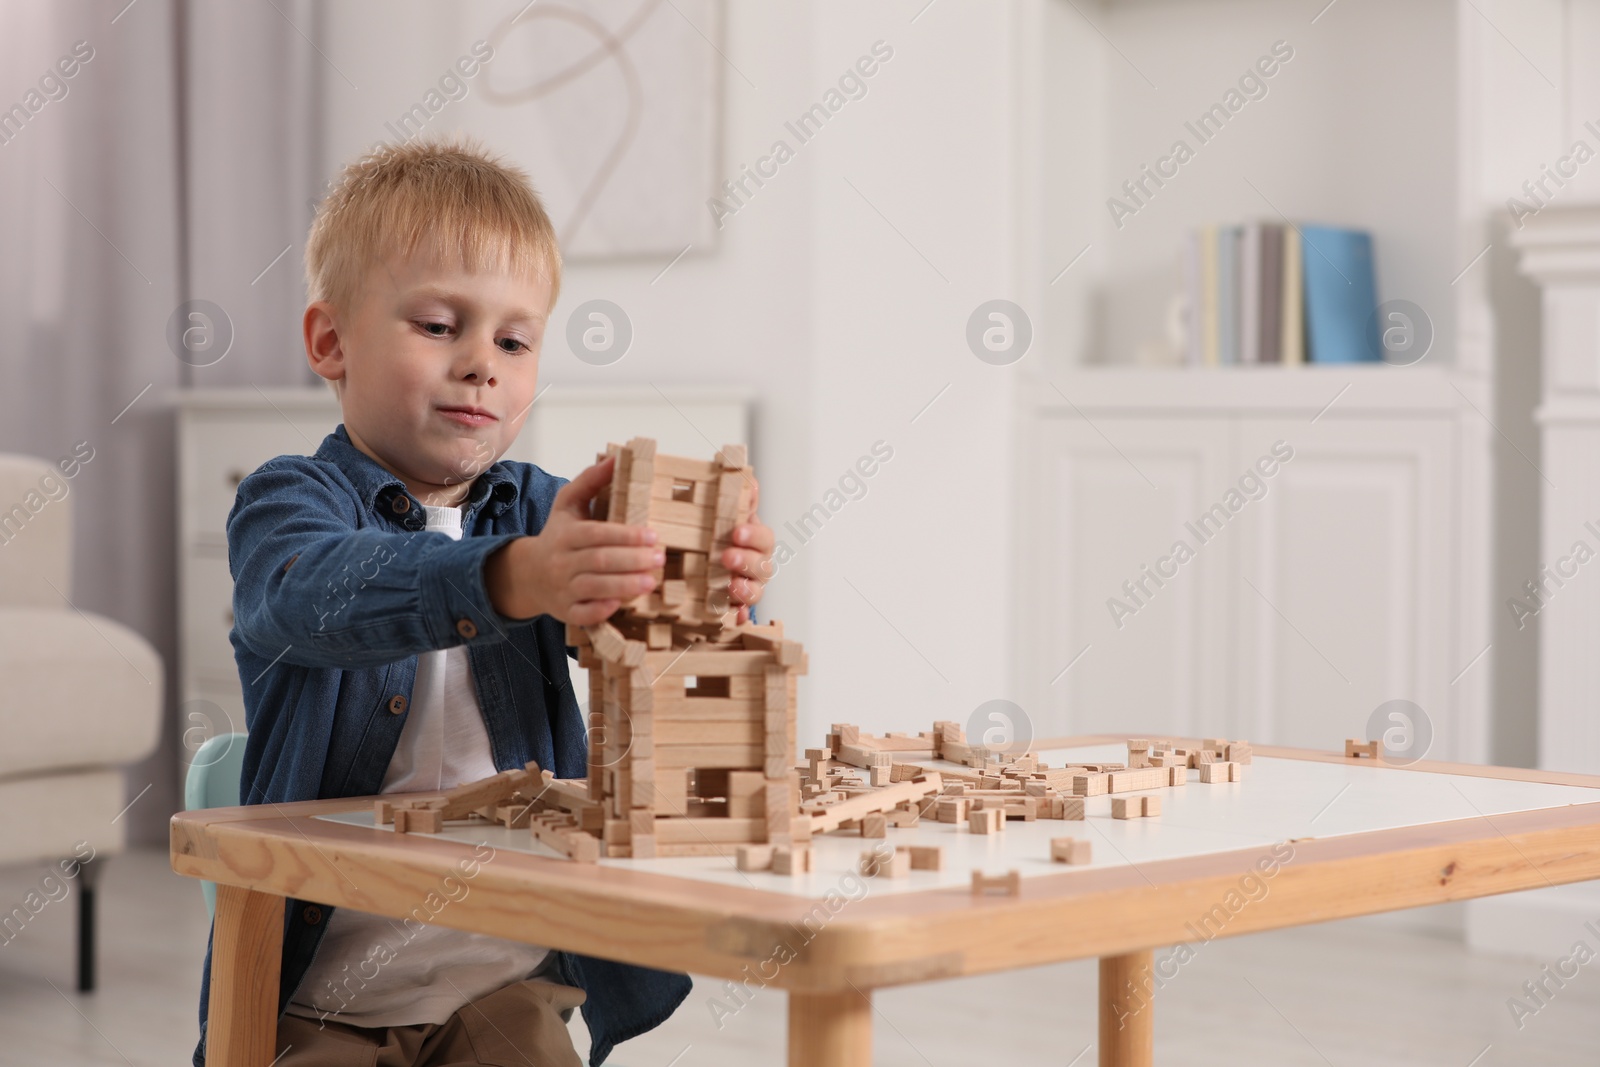 Photo of Cute little boy playing with wooden blocks at table indoors. Child's toy